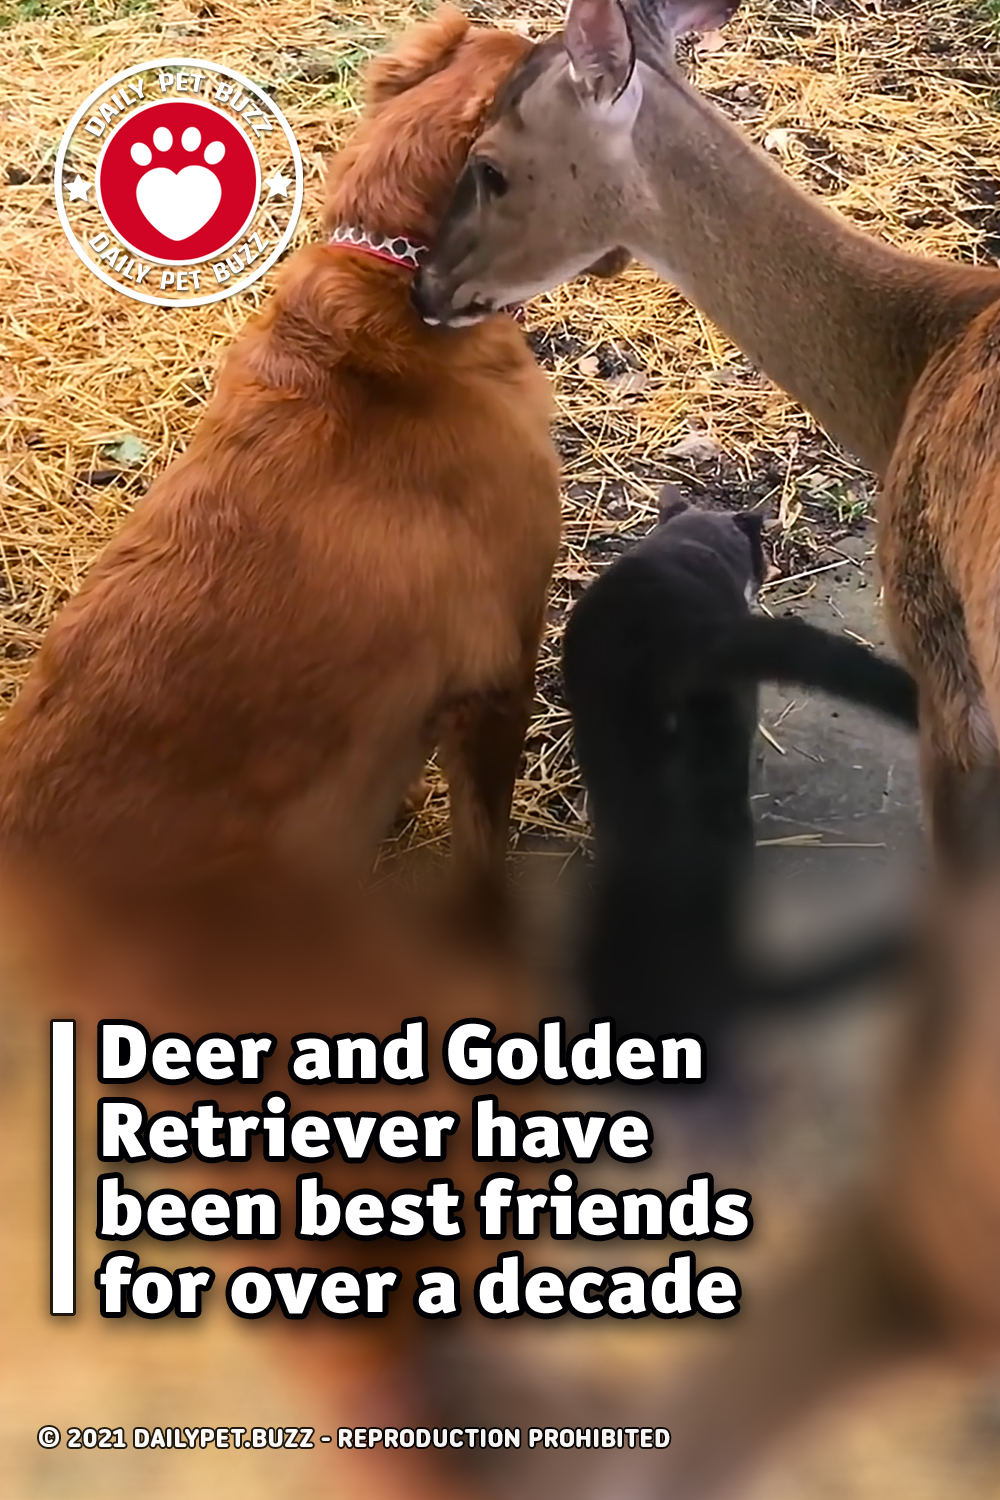 Deer and Golden Retriever have been best friends for over a decade